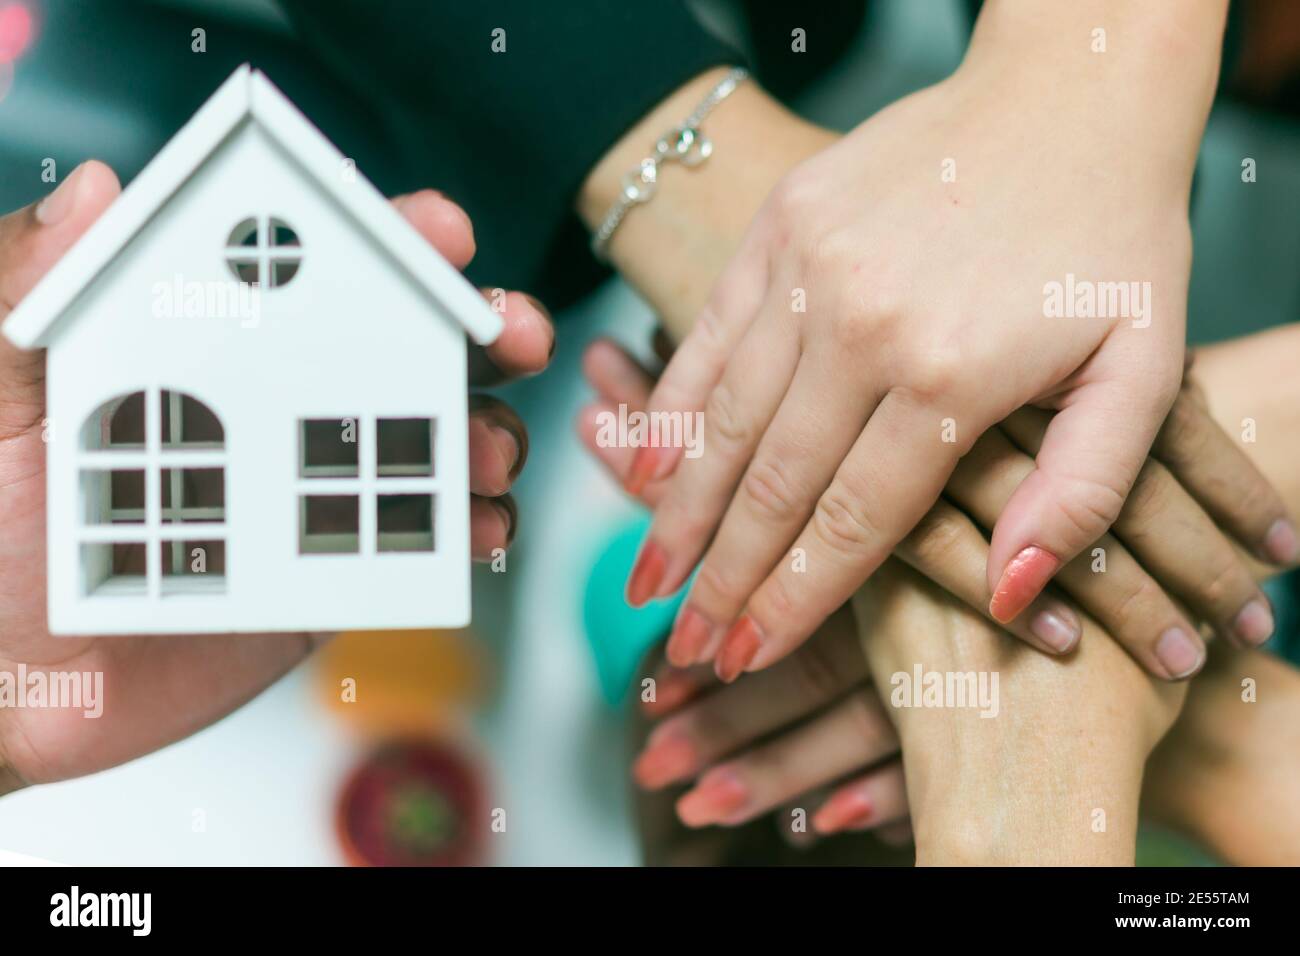 Young people putting their hands together. Friends with stack of hands showing unity and teamwork. Top view of hands and little white house. Real esta Stock Photo